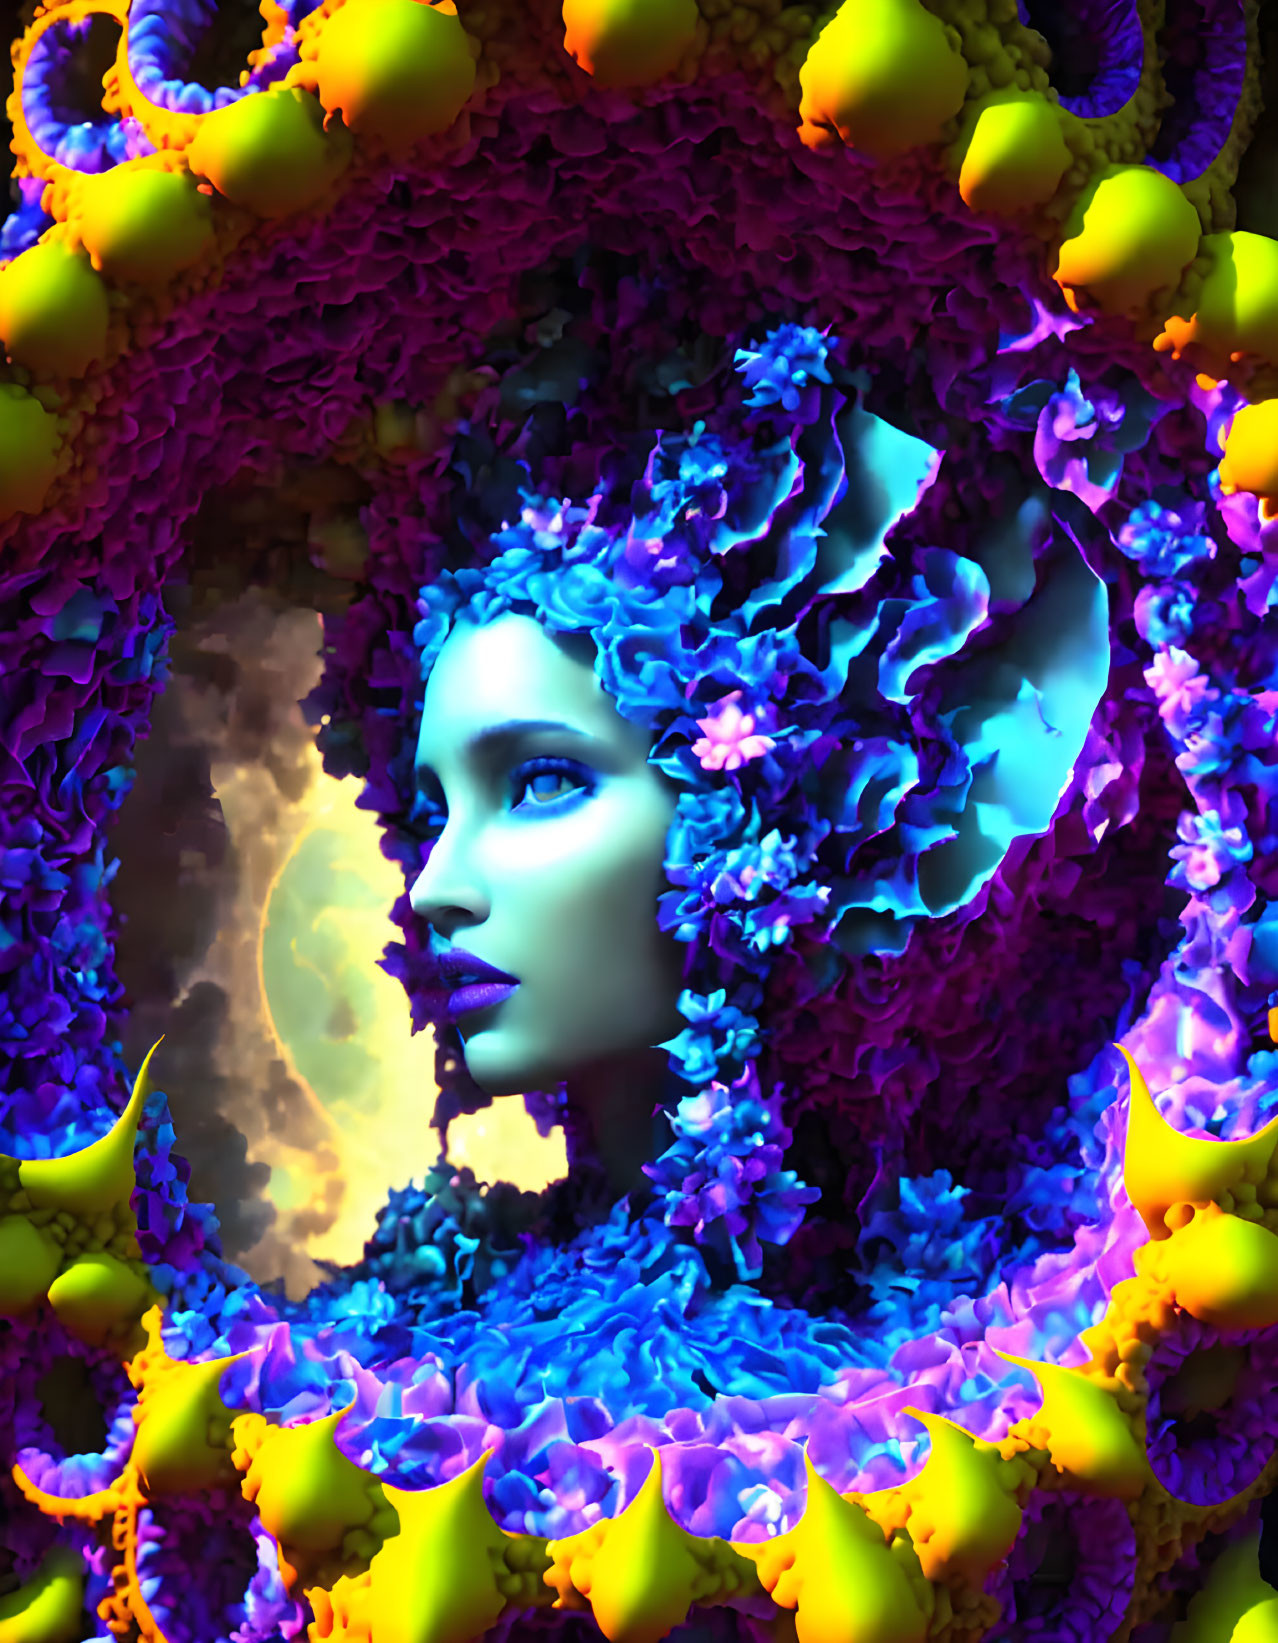 Colorful digital artwork: Woman's profile with blue skin in neon fractal patterns